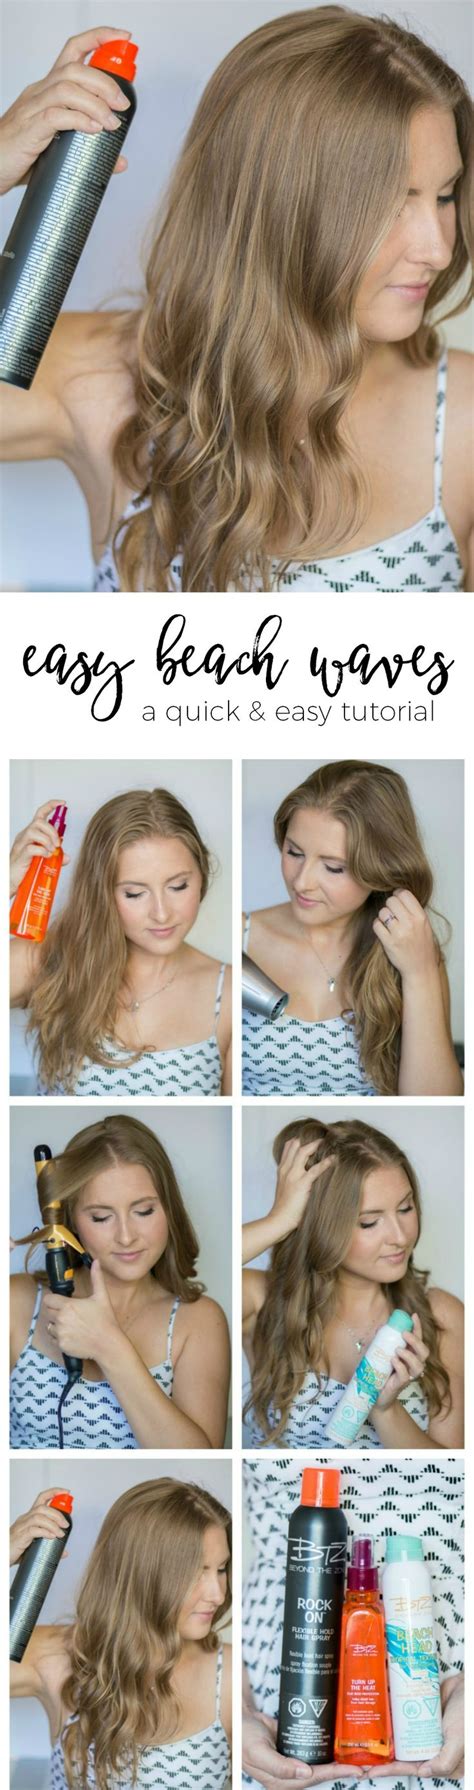 How To Get The Perfect Beach Waves Want Effortless Beach Waves This